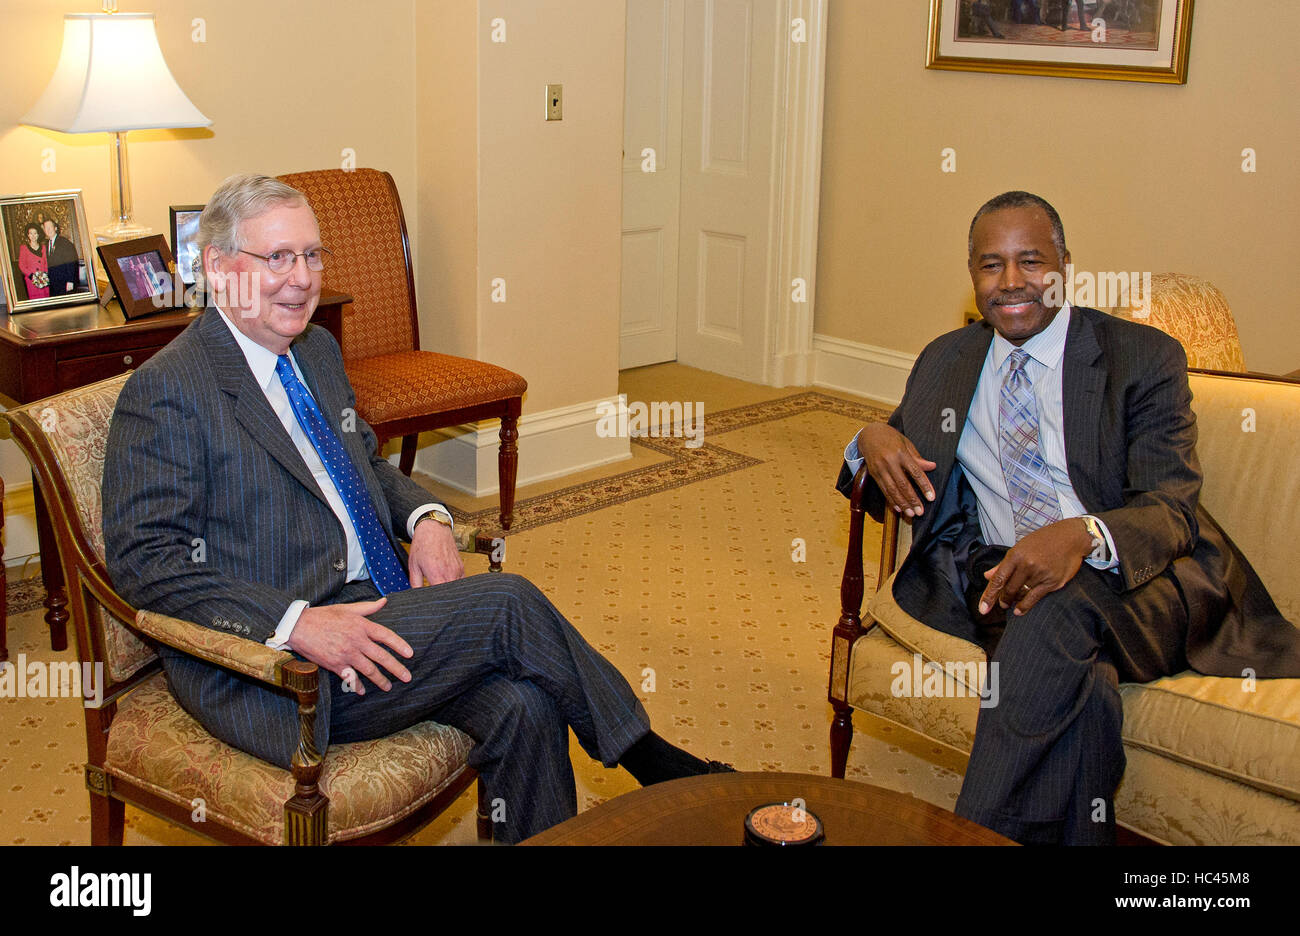 Washington DC, USA. 7th Dec, 2016. United States Senate Majority Leader Mitch McConnell (Republican of Kentucky), left, meets retired neurosurgeon Dr. Ben Carson, US President-elect Donald J. Trump's selection to be US Secretary of Housing and Urban Development (HUD), in his office in the US Capitol in Washington, DC on Wednesday, December 7, 2016. Credit: Ron Sachs/CNP /MediaPunch Credit:  MediaPunch Inc/Alamy Live News Stock Photo